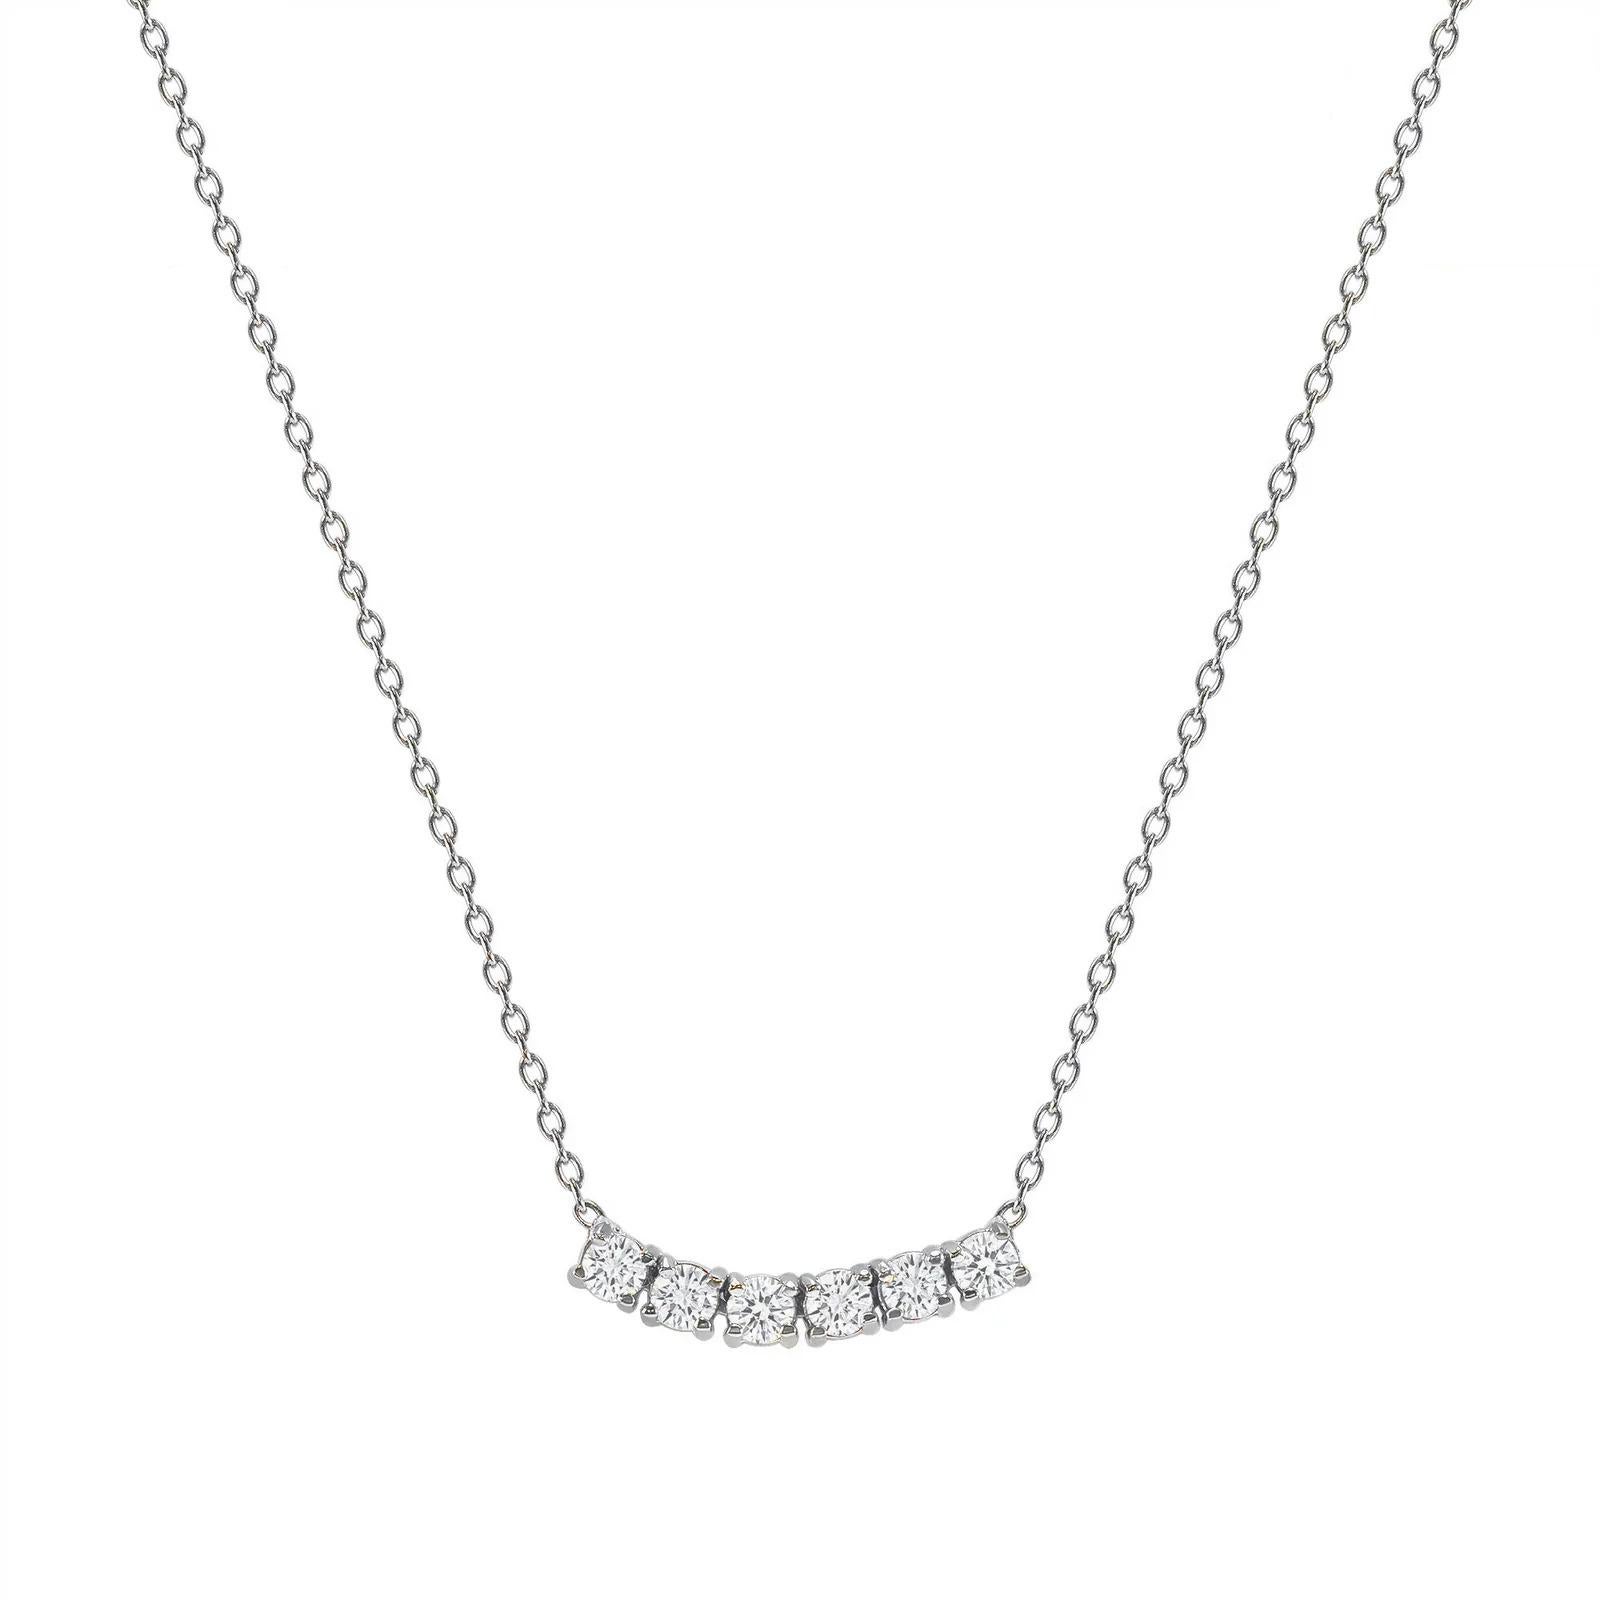 This petite, curved diamond necklace is crafted with gorgeous 14k gold set with six round diamonds.  

Gold: 14k 
Diamond Total Carats: 0.25ct
Diamond Cut: Round (6 diamonds)
Diamond Clarity: VS
Diamond Color: F
Color: White Gold
Necklace Length: 22